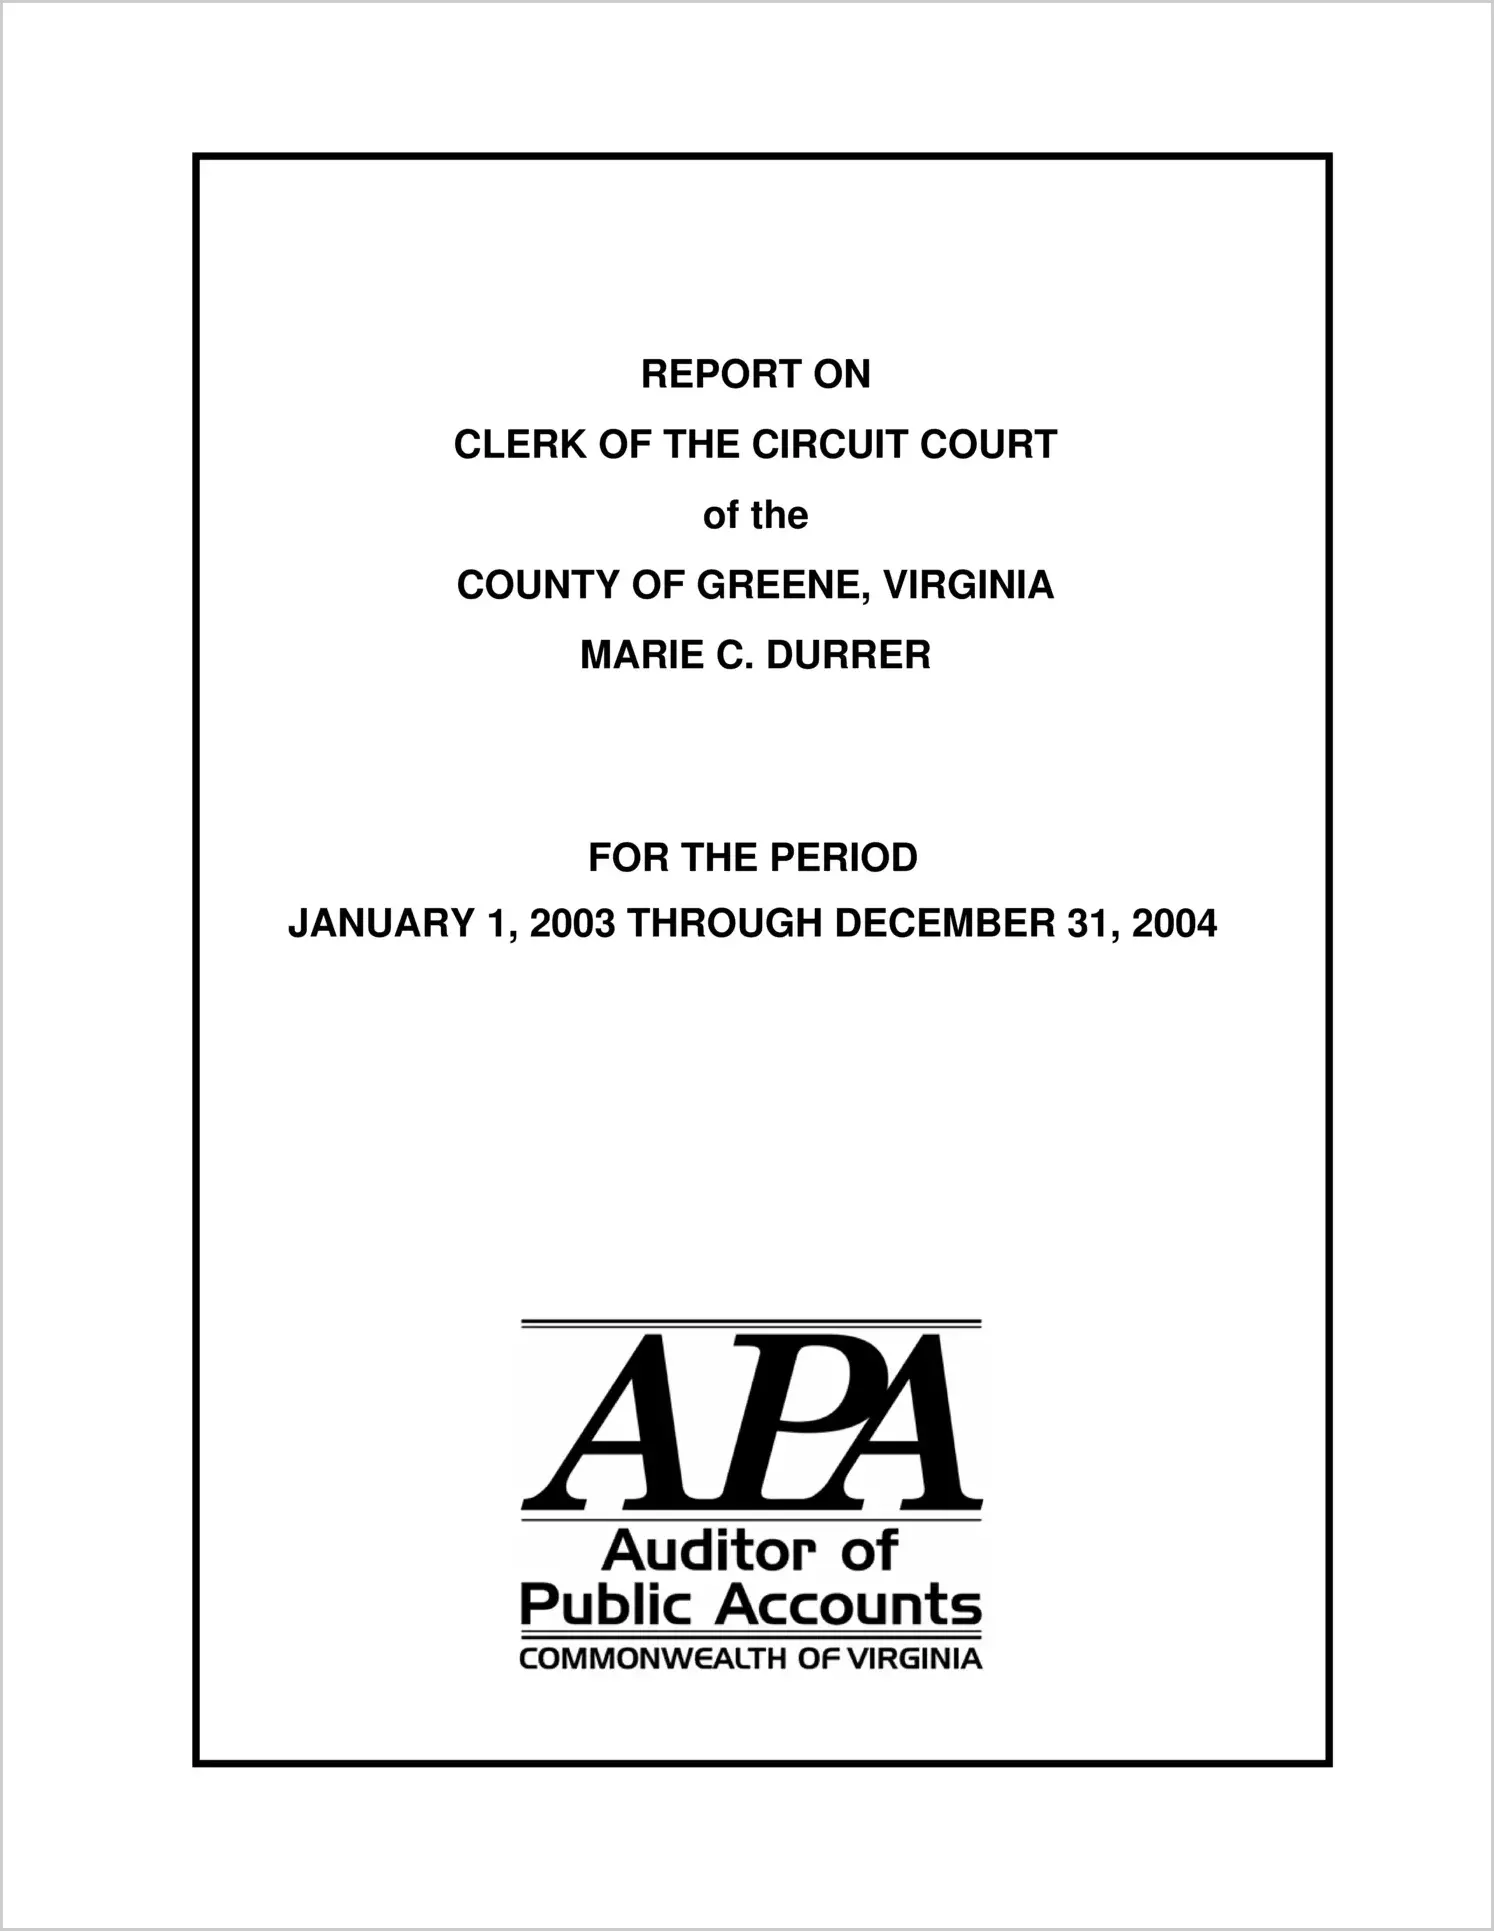 Clerk of the Circuit Court of the County of Greene for the period January 1, 2003 through December 31, 2004